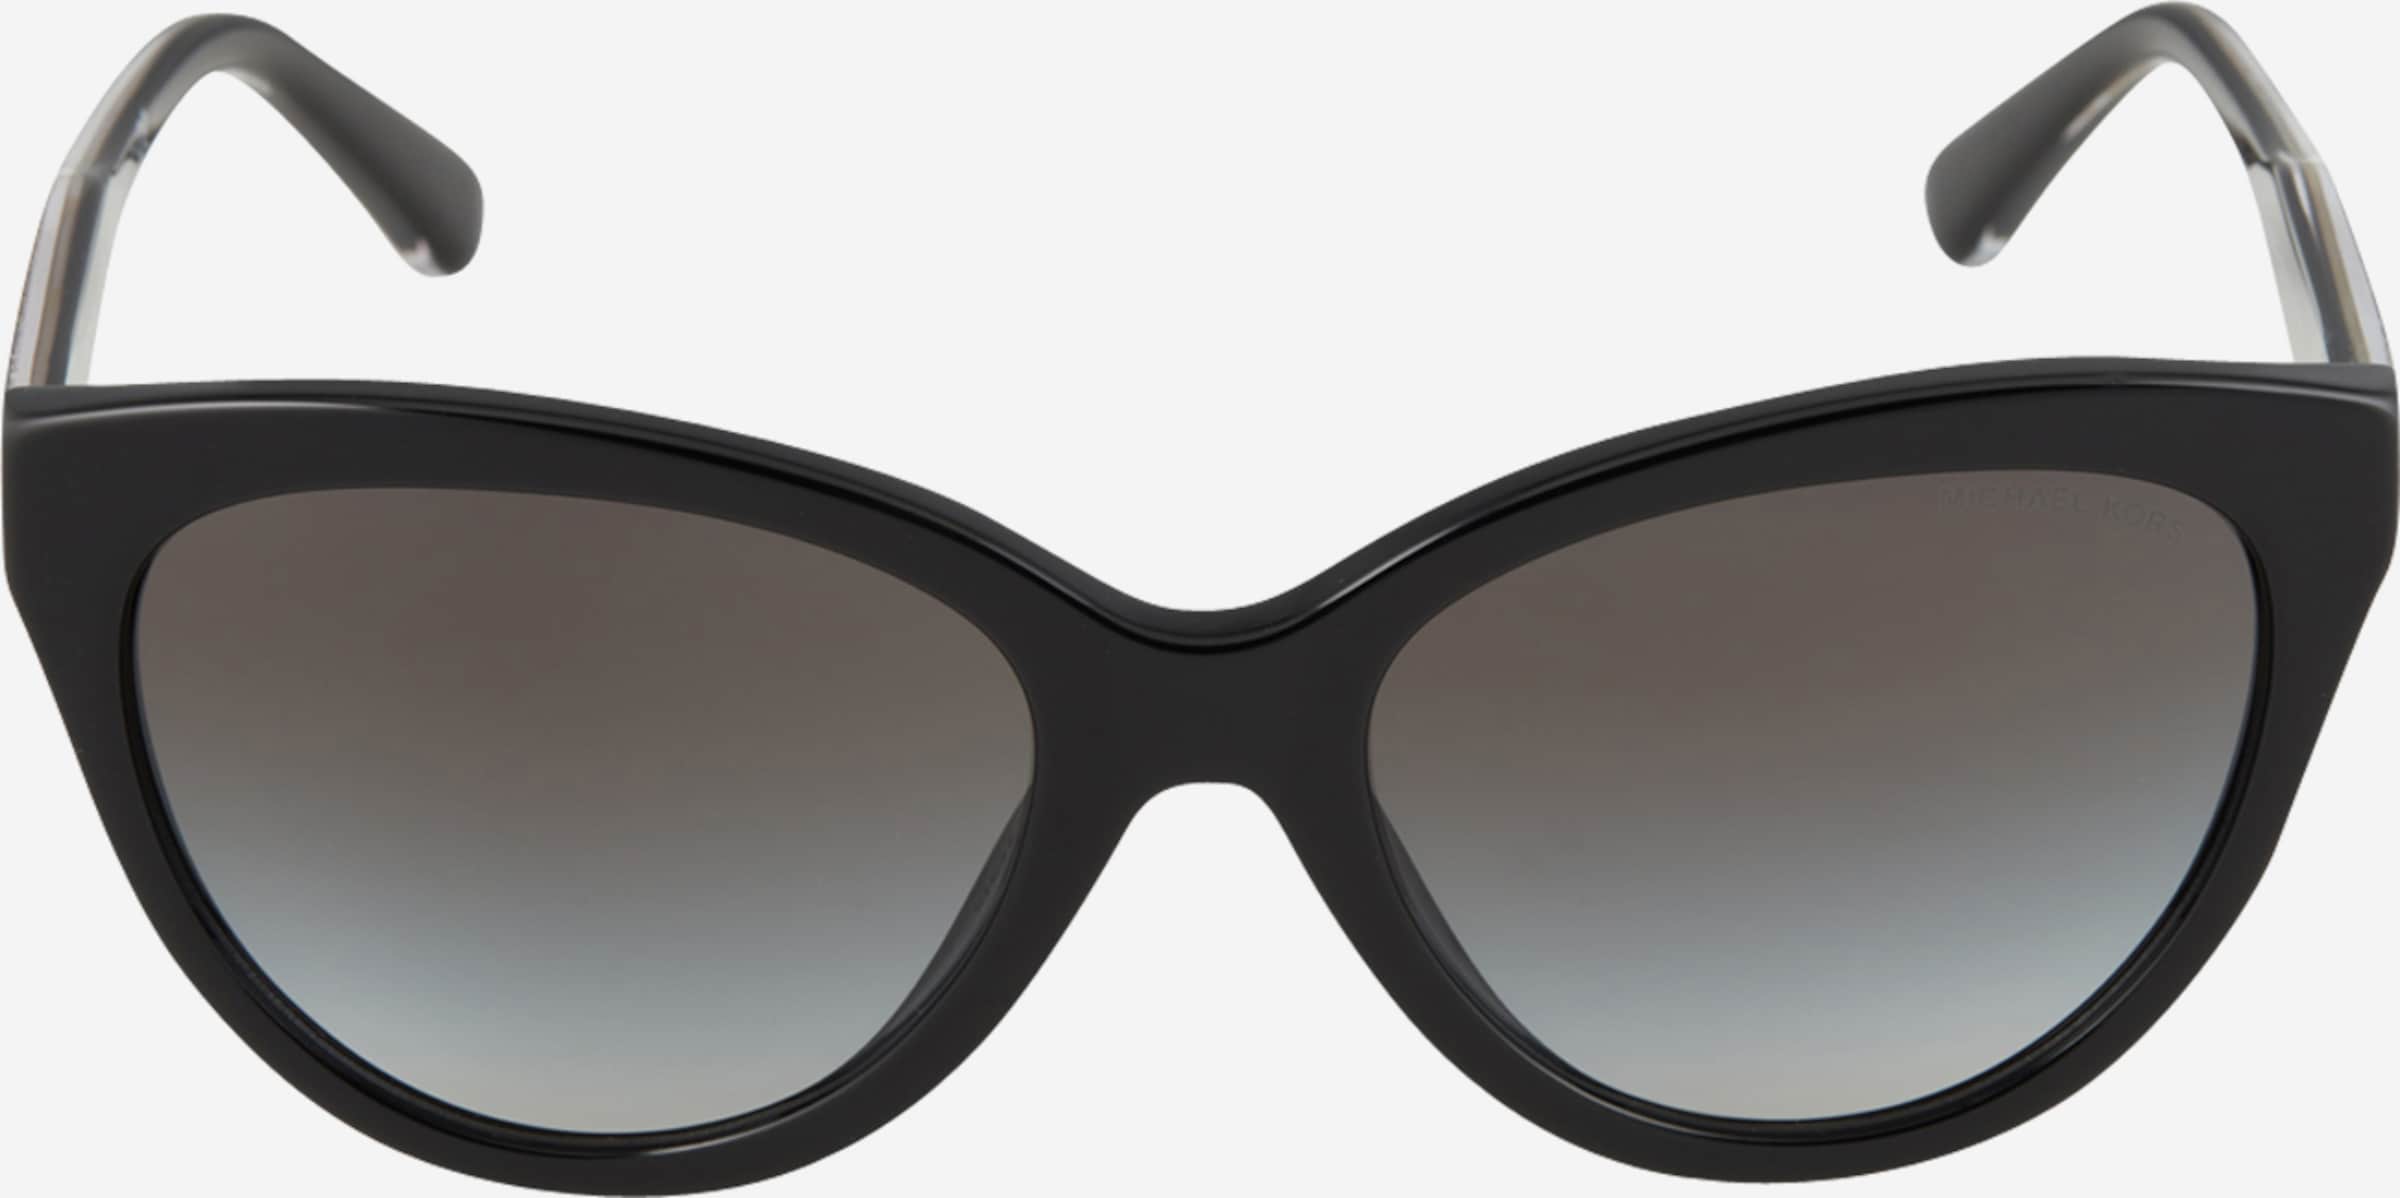 Michael Kors Sonnenbrille in Schwarz | ABOUT YOU